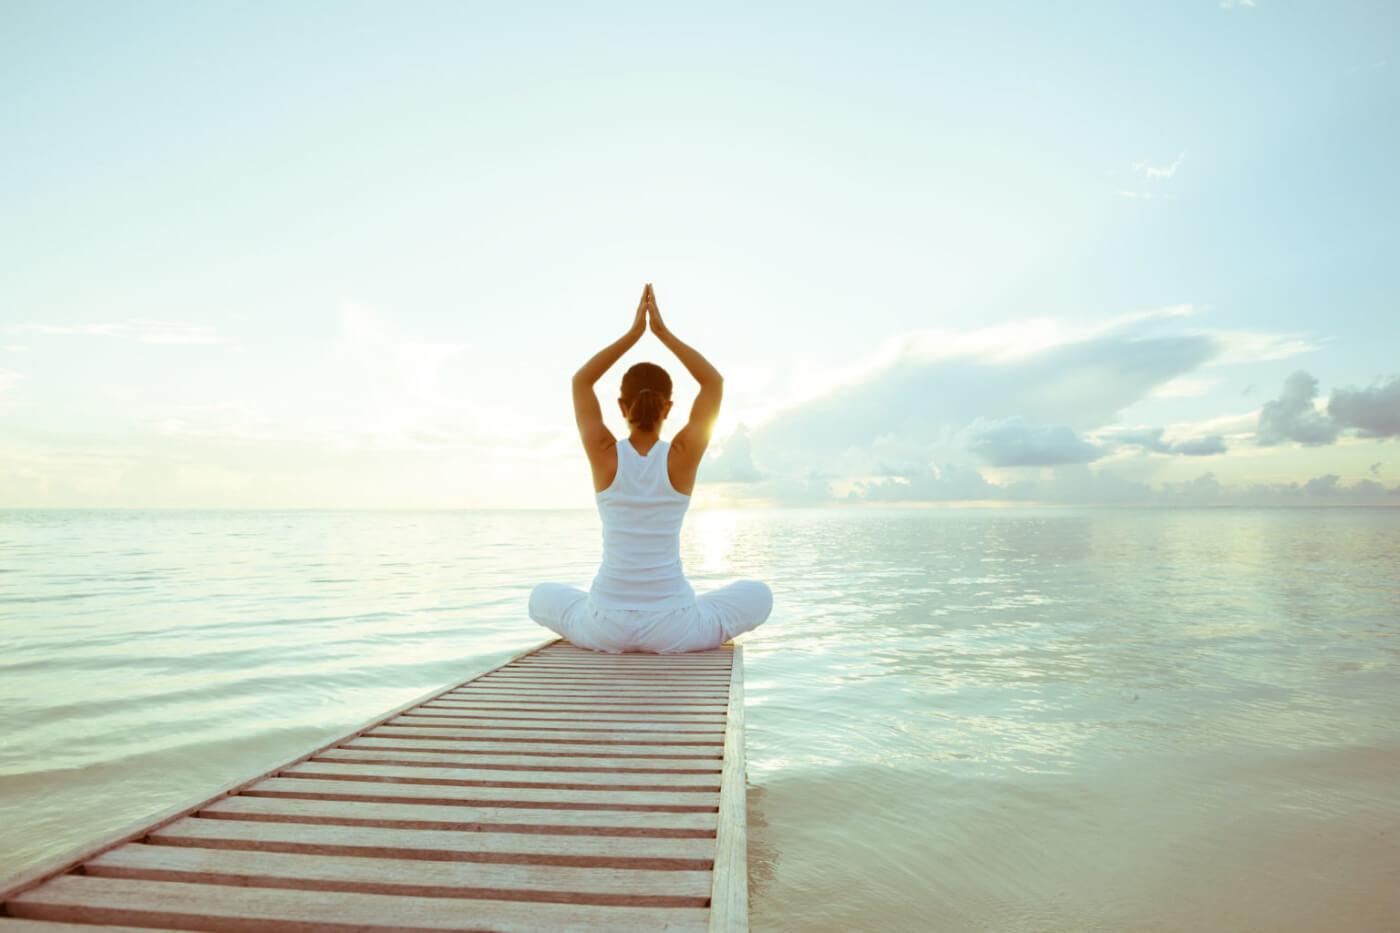 Stay in shape, stay healthy with Everyday Yoga